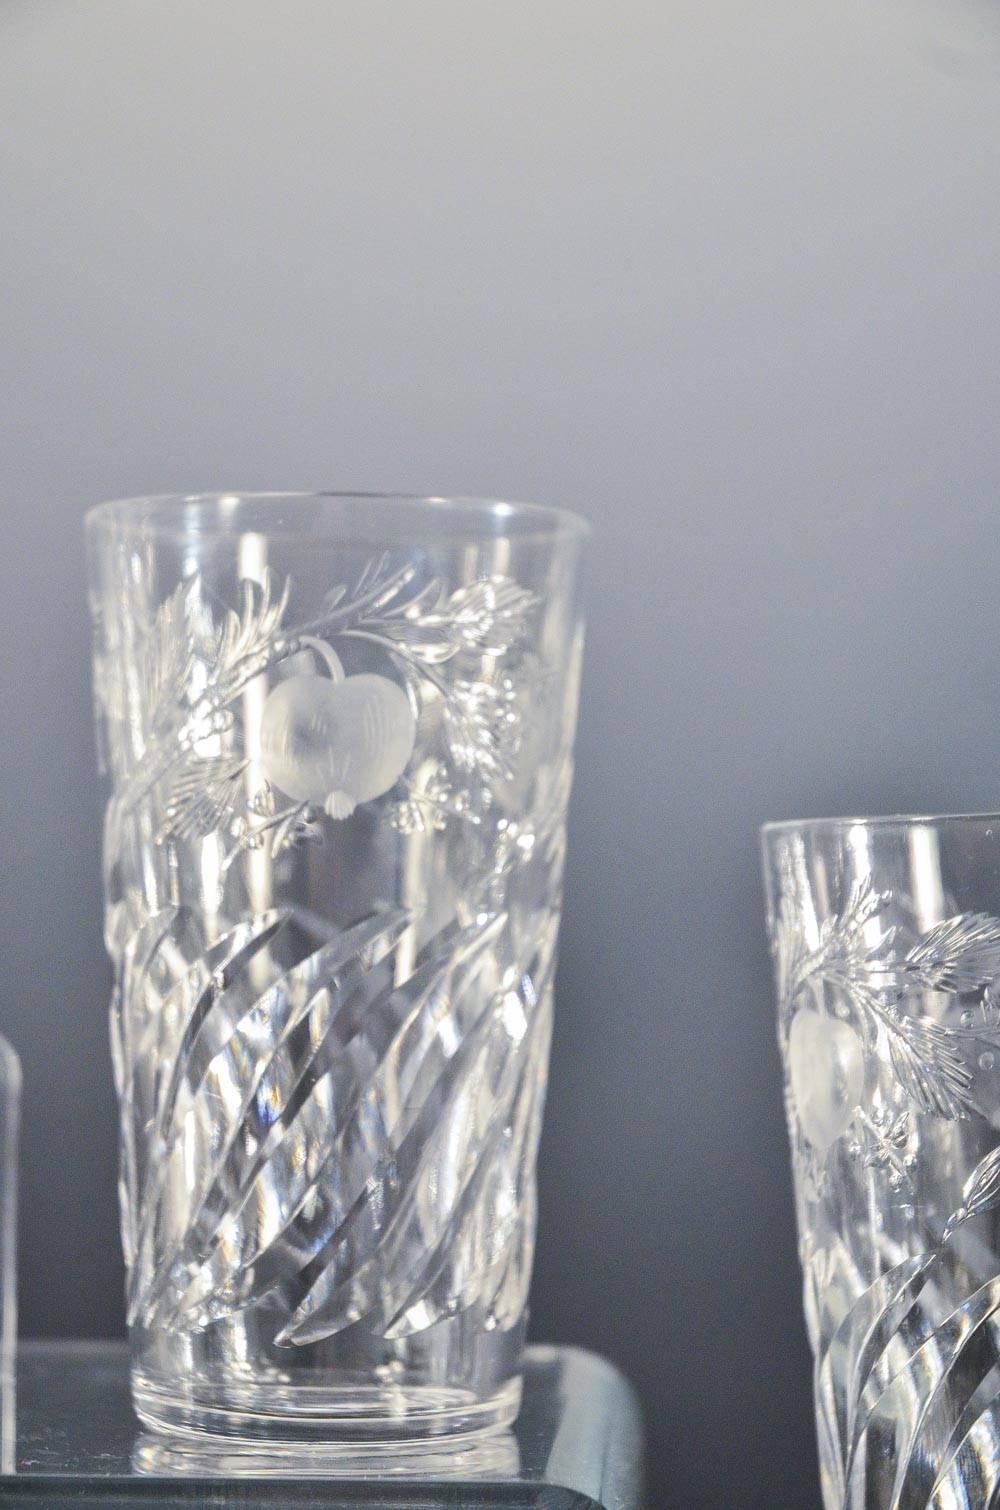 Tumblers are in! This set of hand blown crystal tumblers were made by T. G. Hawkes, iconic glassblowers and engravers in Corning, NY. These are wheel cut in the 